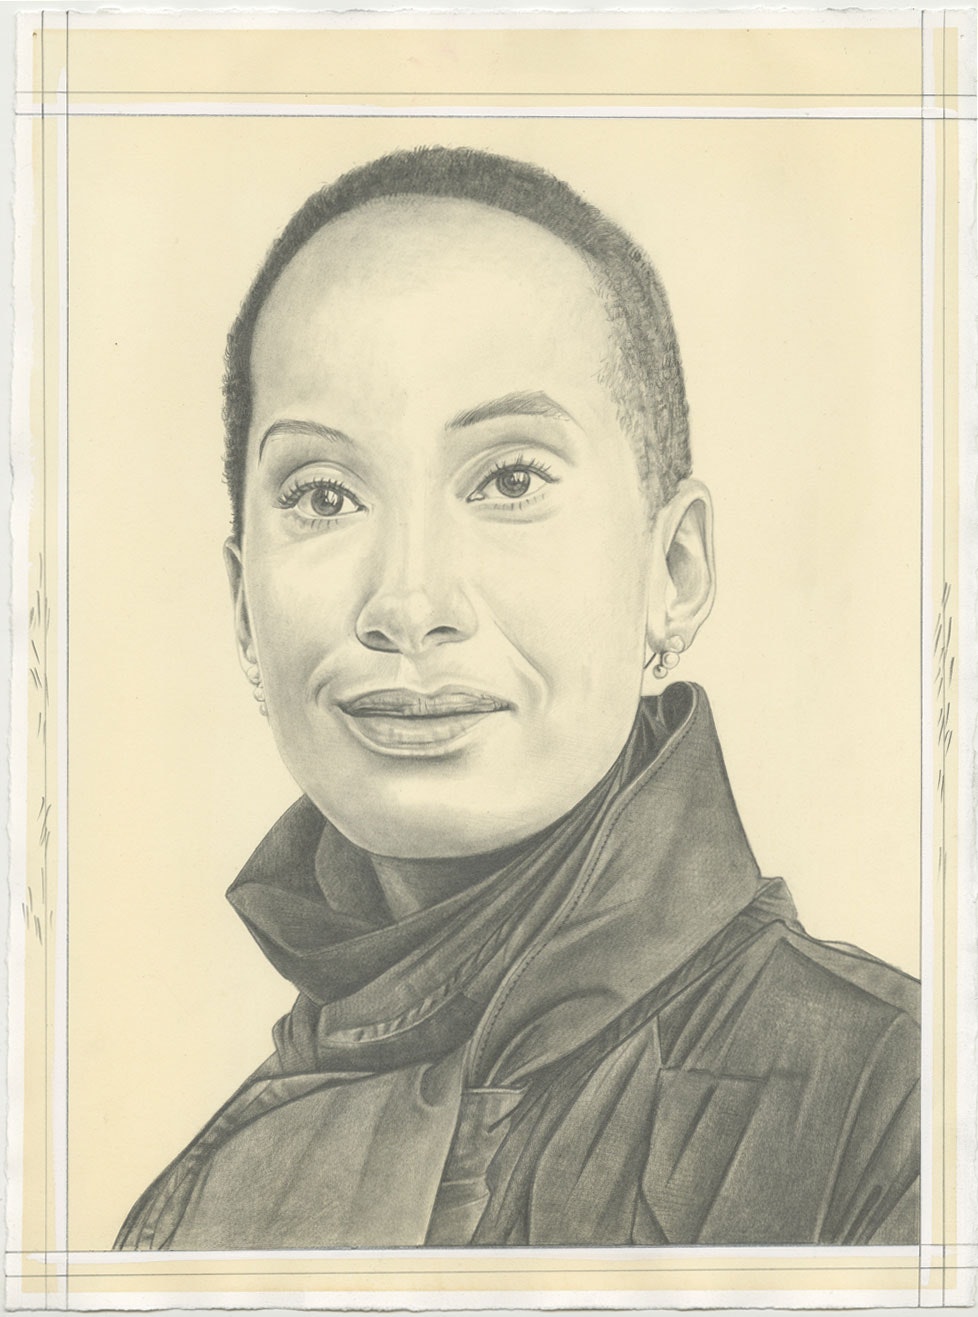 Portrait of Daisy Desrosiers, pencil on paper by Phong H. Bui.